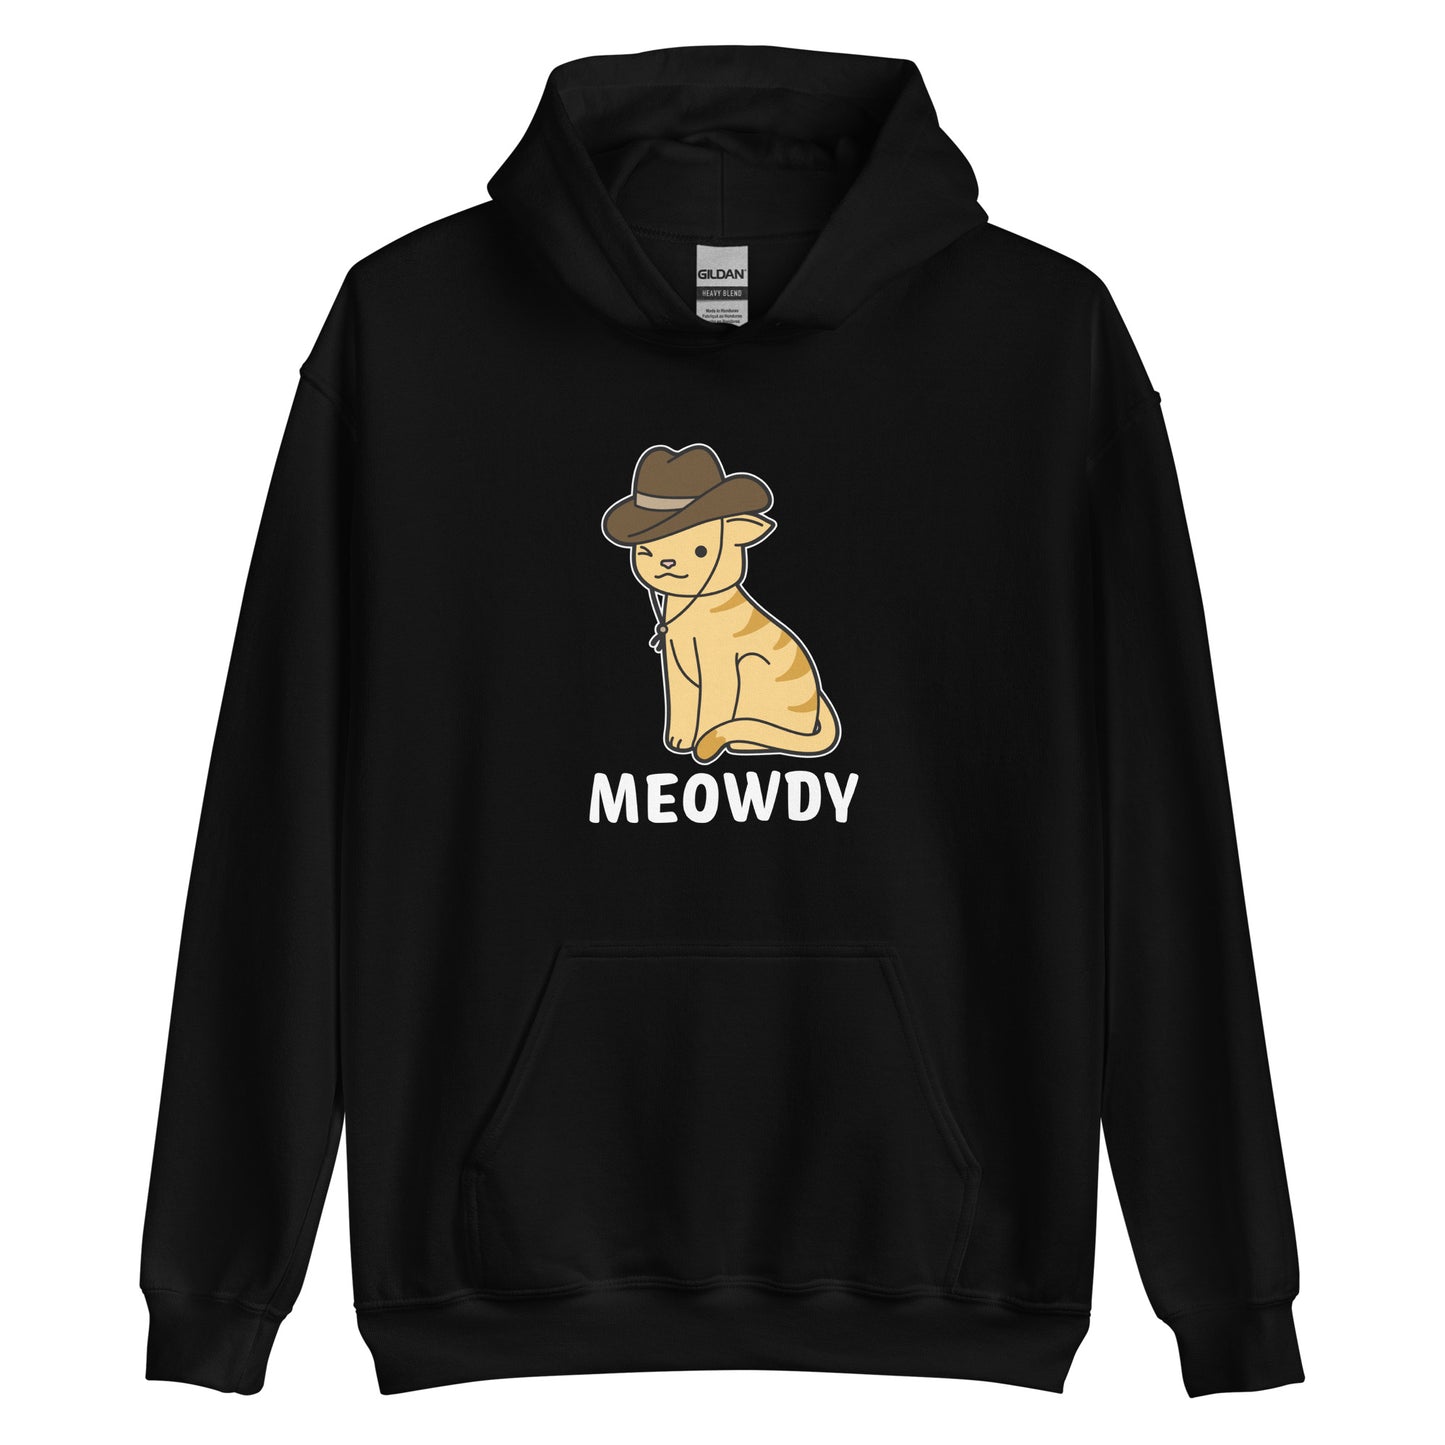 A black hooded sweatshirt featuring a cartoon drawing of an orange striped cat. The cat is winking and wearing a cowboy hat. Text beneath the cat reads "Meowdy"